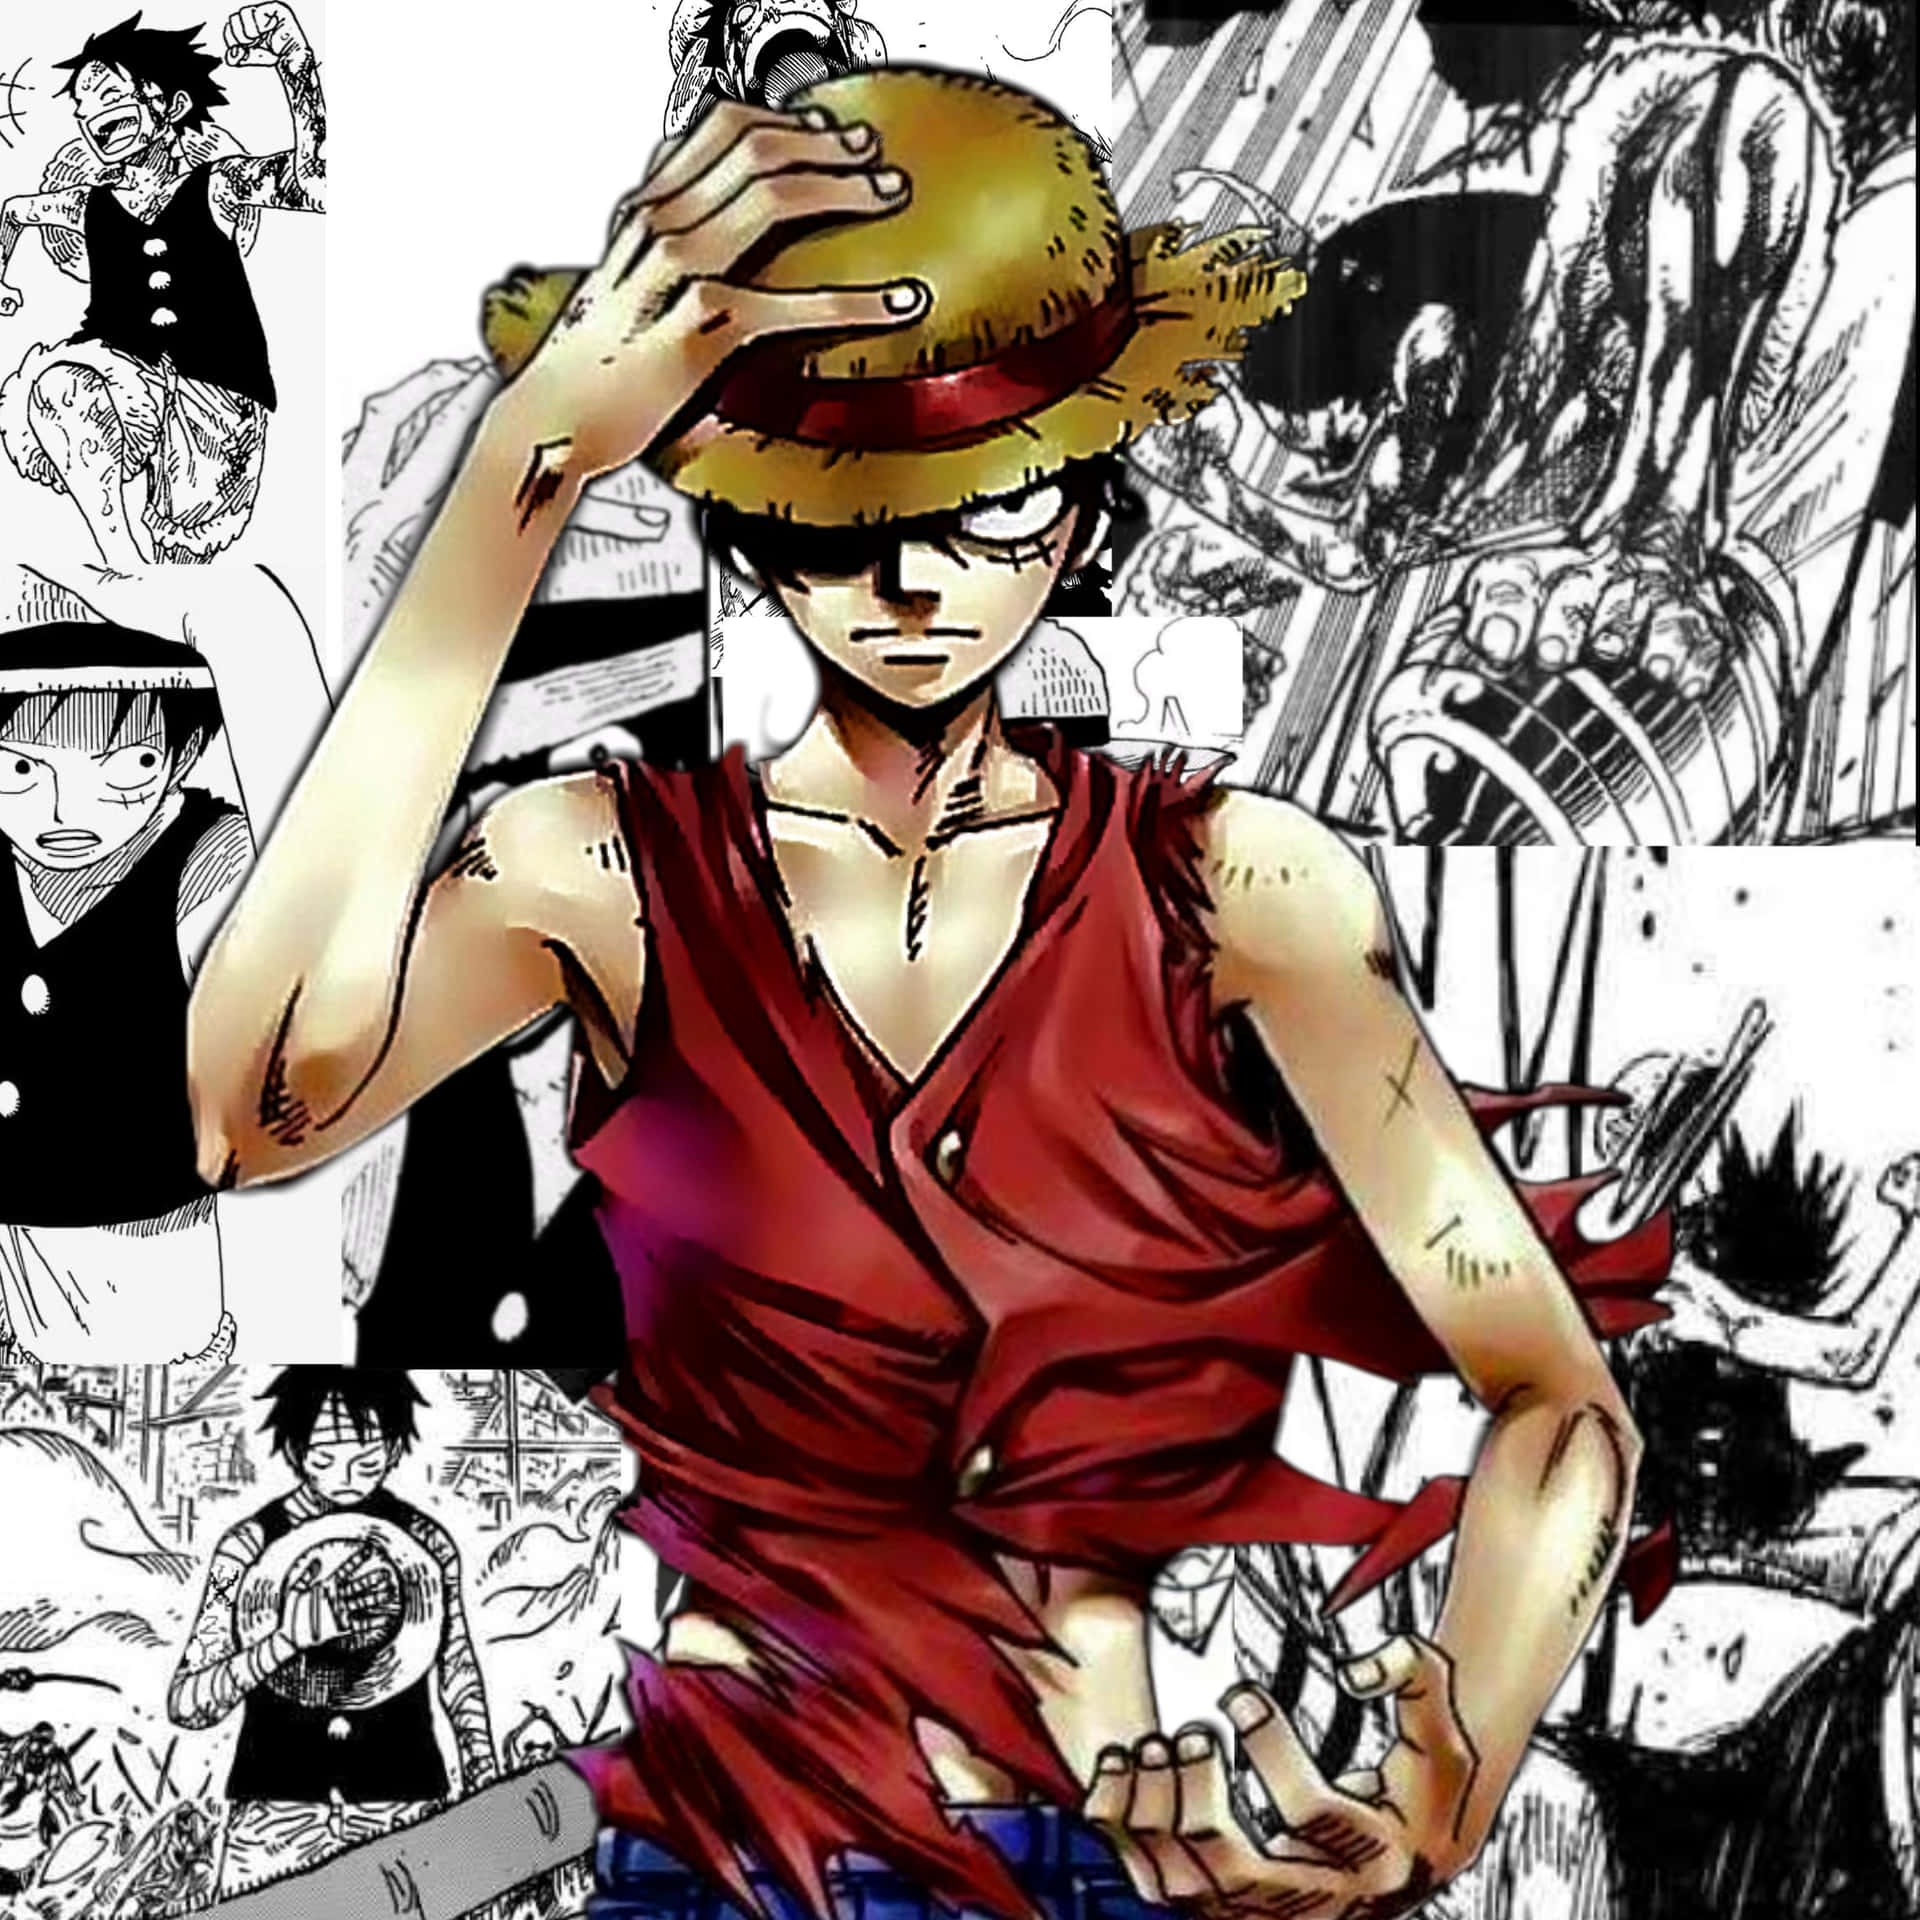 Image Cool Luffy, Beating Every Obstacle In His Path Background